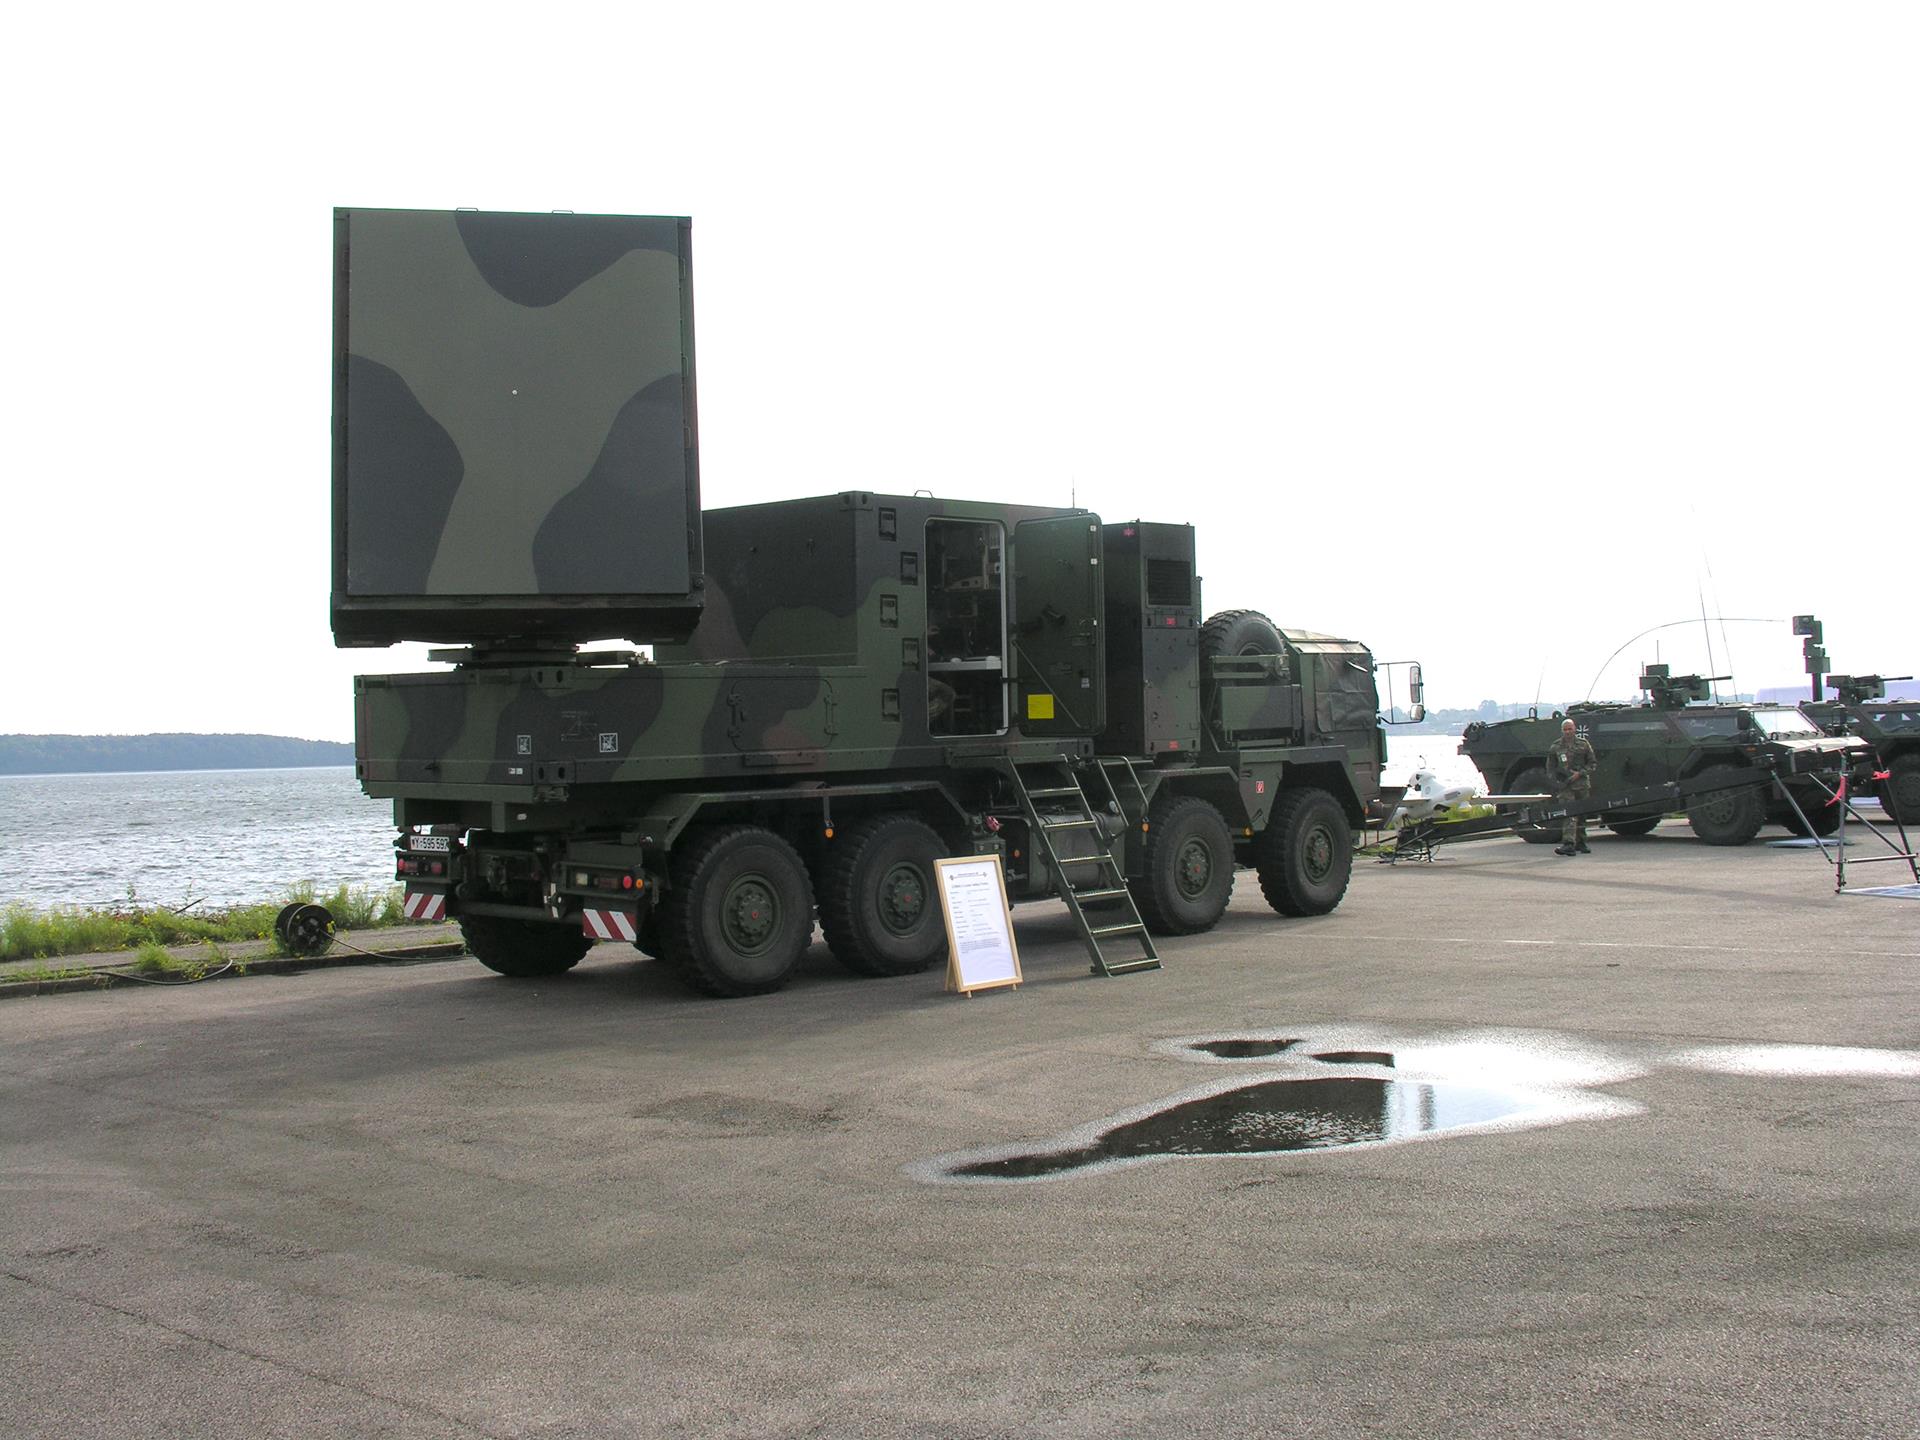 COBRA radars for Ukraine.  The Germans want to help locate Russian artillery